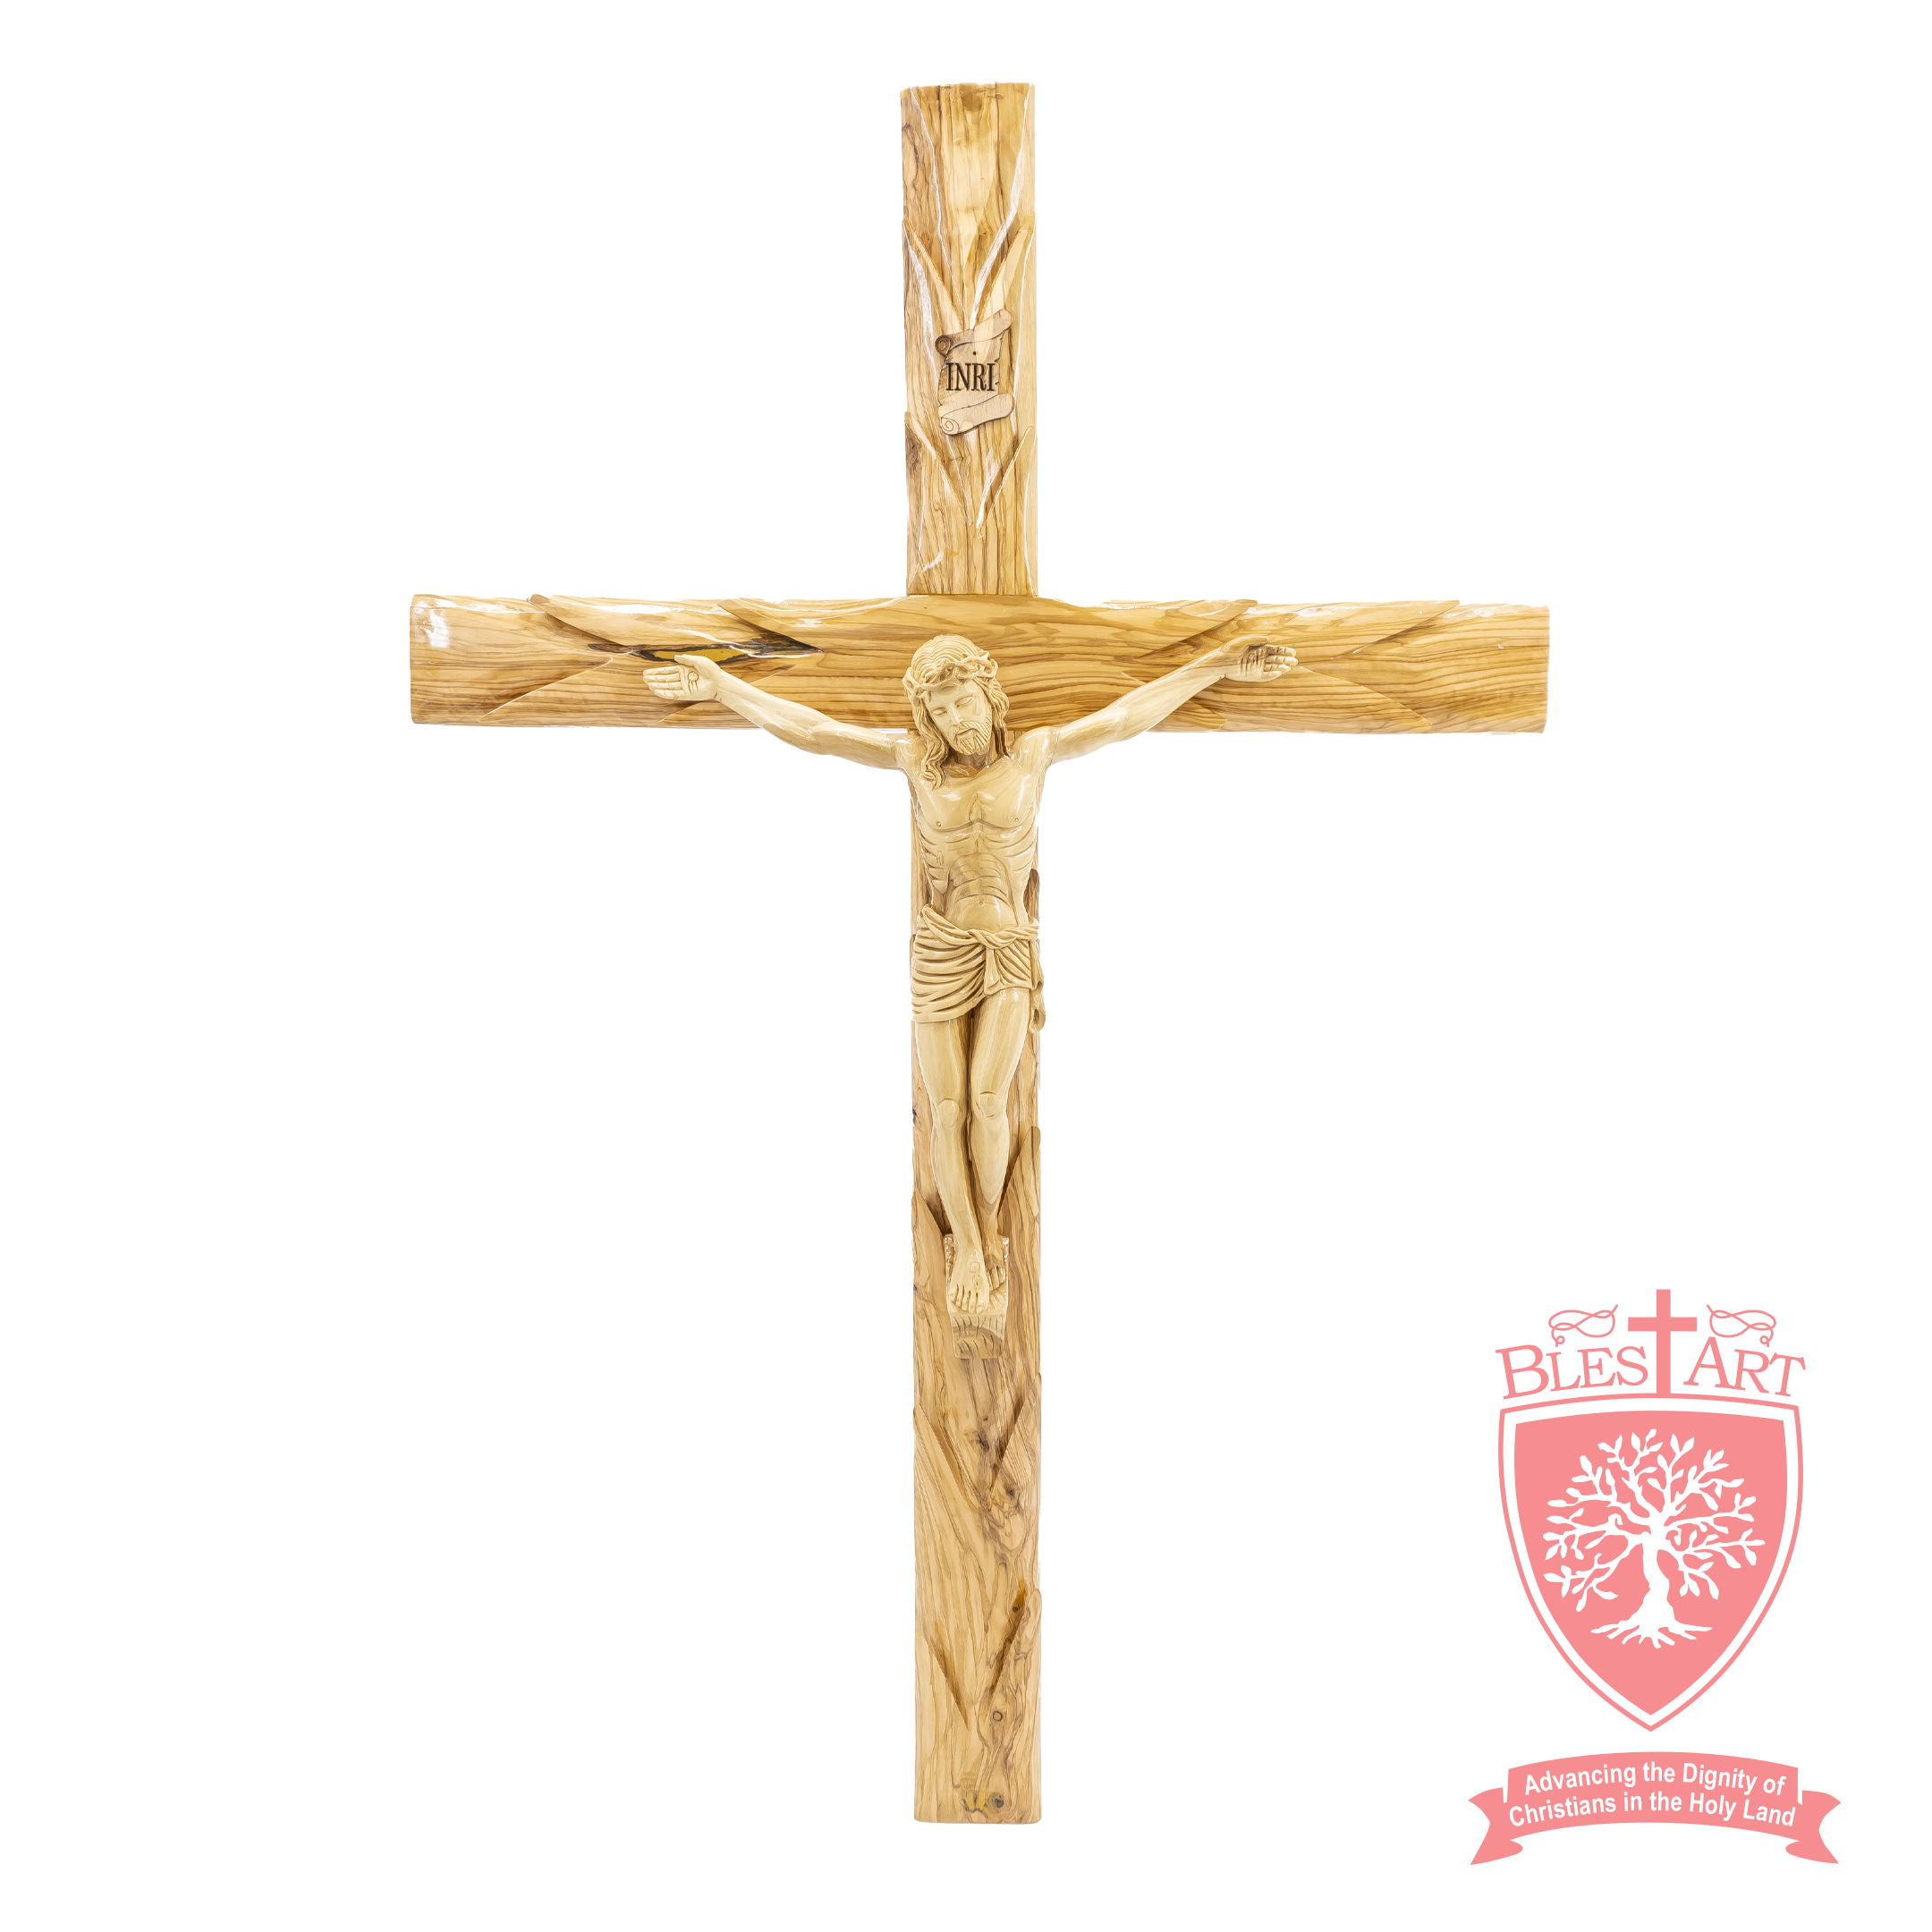 Birsppy HORLAT Wood Cross Hand Painted 25cms. Latin American Cross. Cross  made from wood.